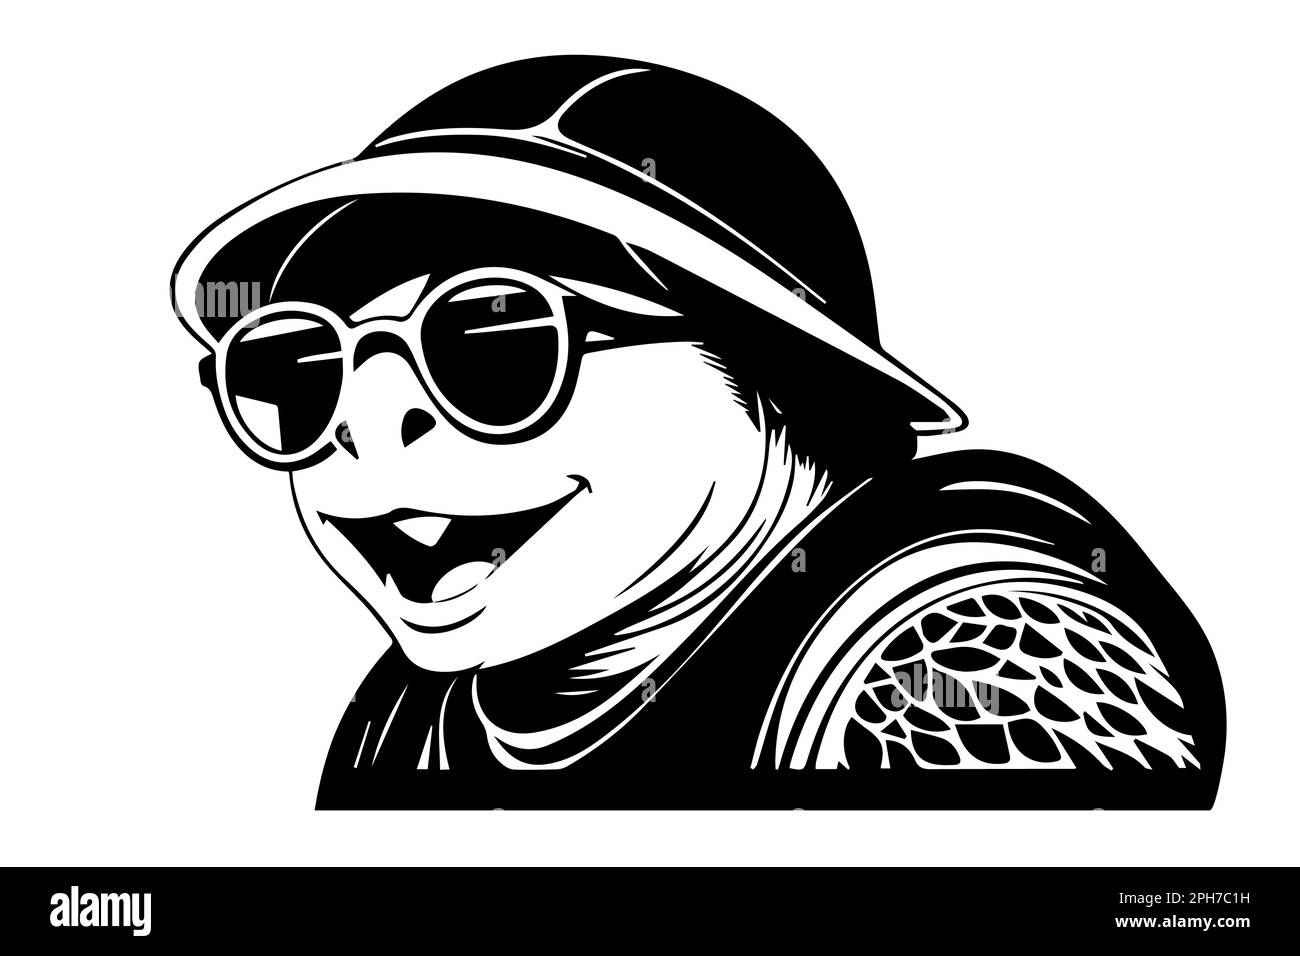 Turtle in a hat and sunglasses. Vector illustration. black and white. Stock Vector